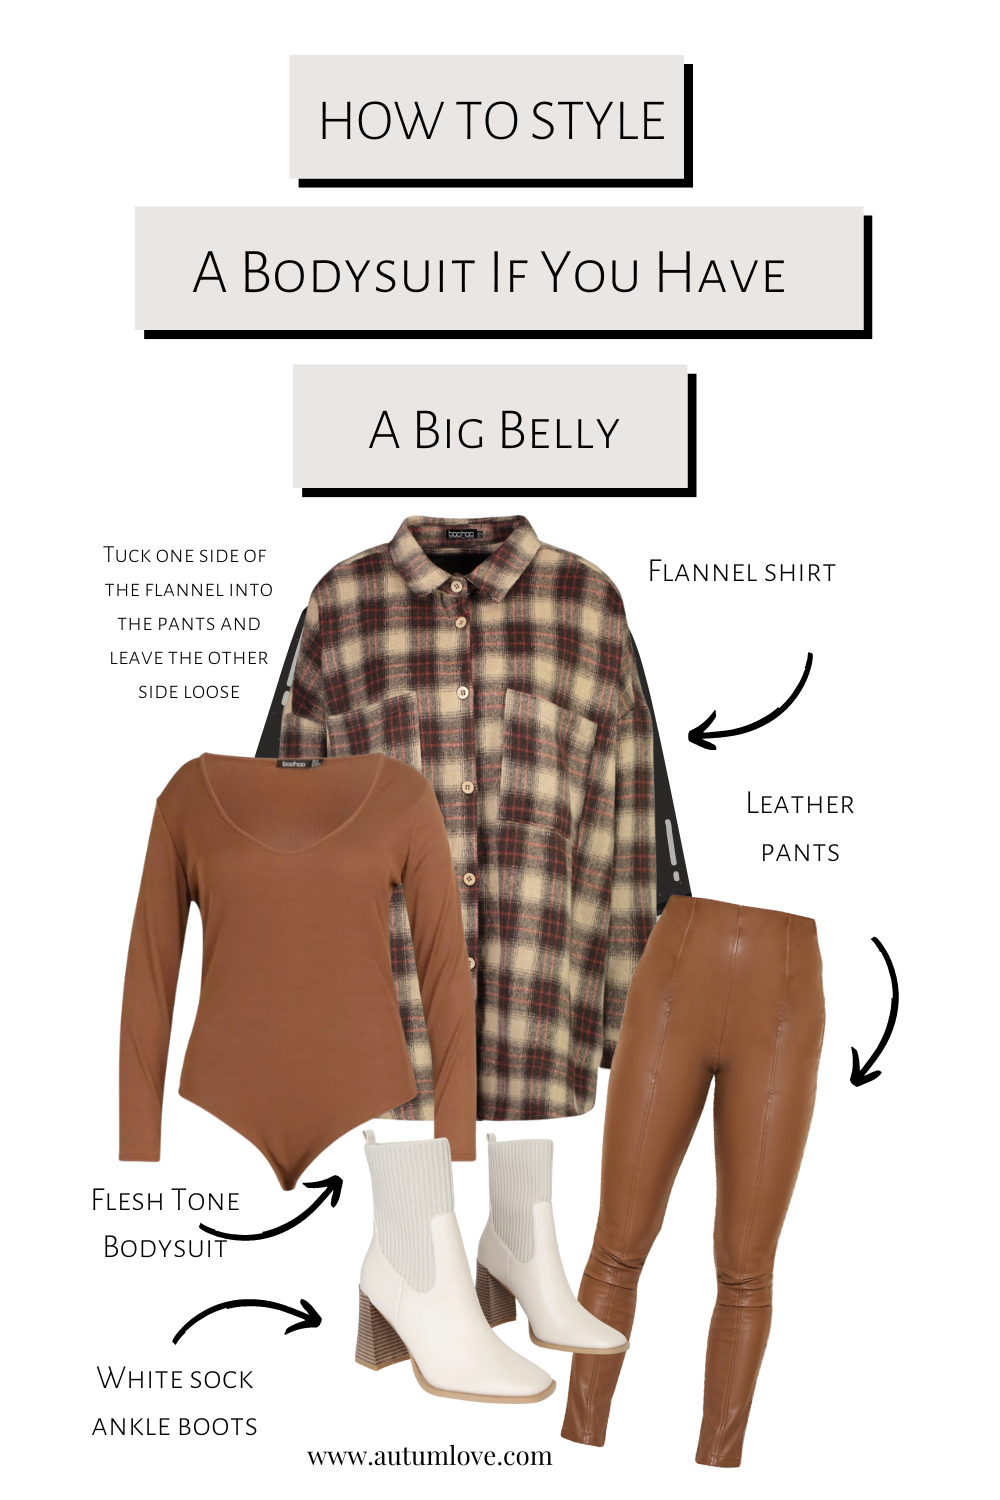 To Wear A Bodysuit If You a Belly — Autum